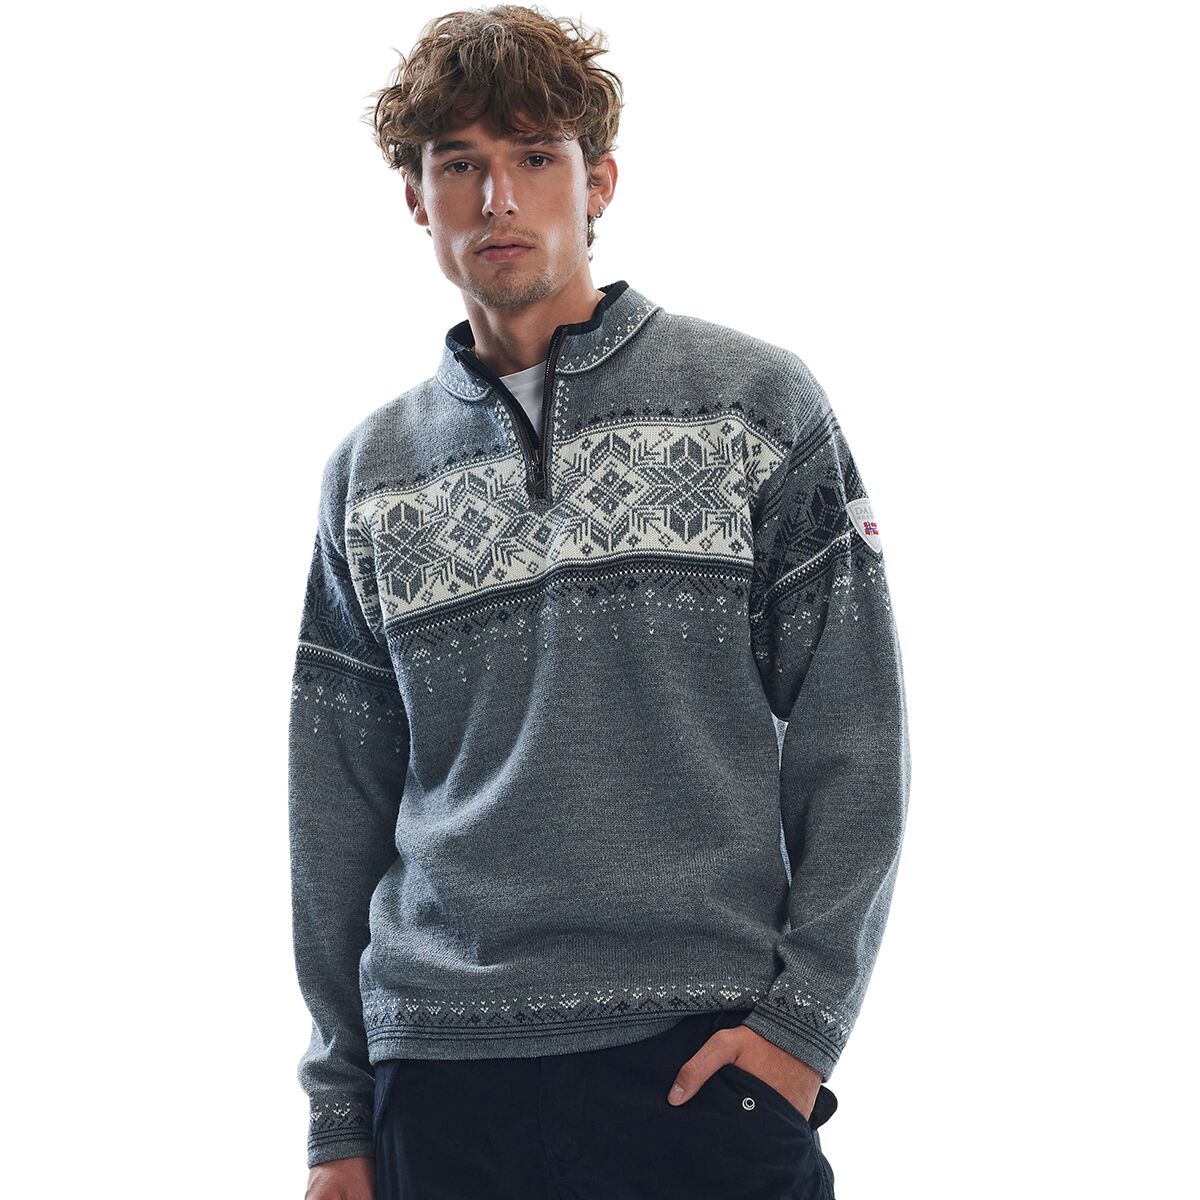 Dale of Norway Blyfjell Sweater - Men's